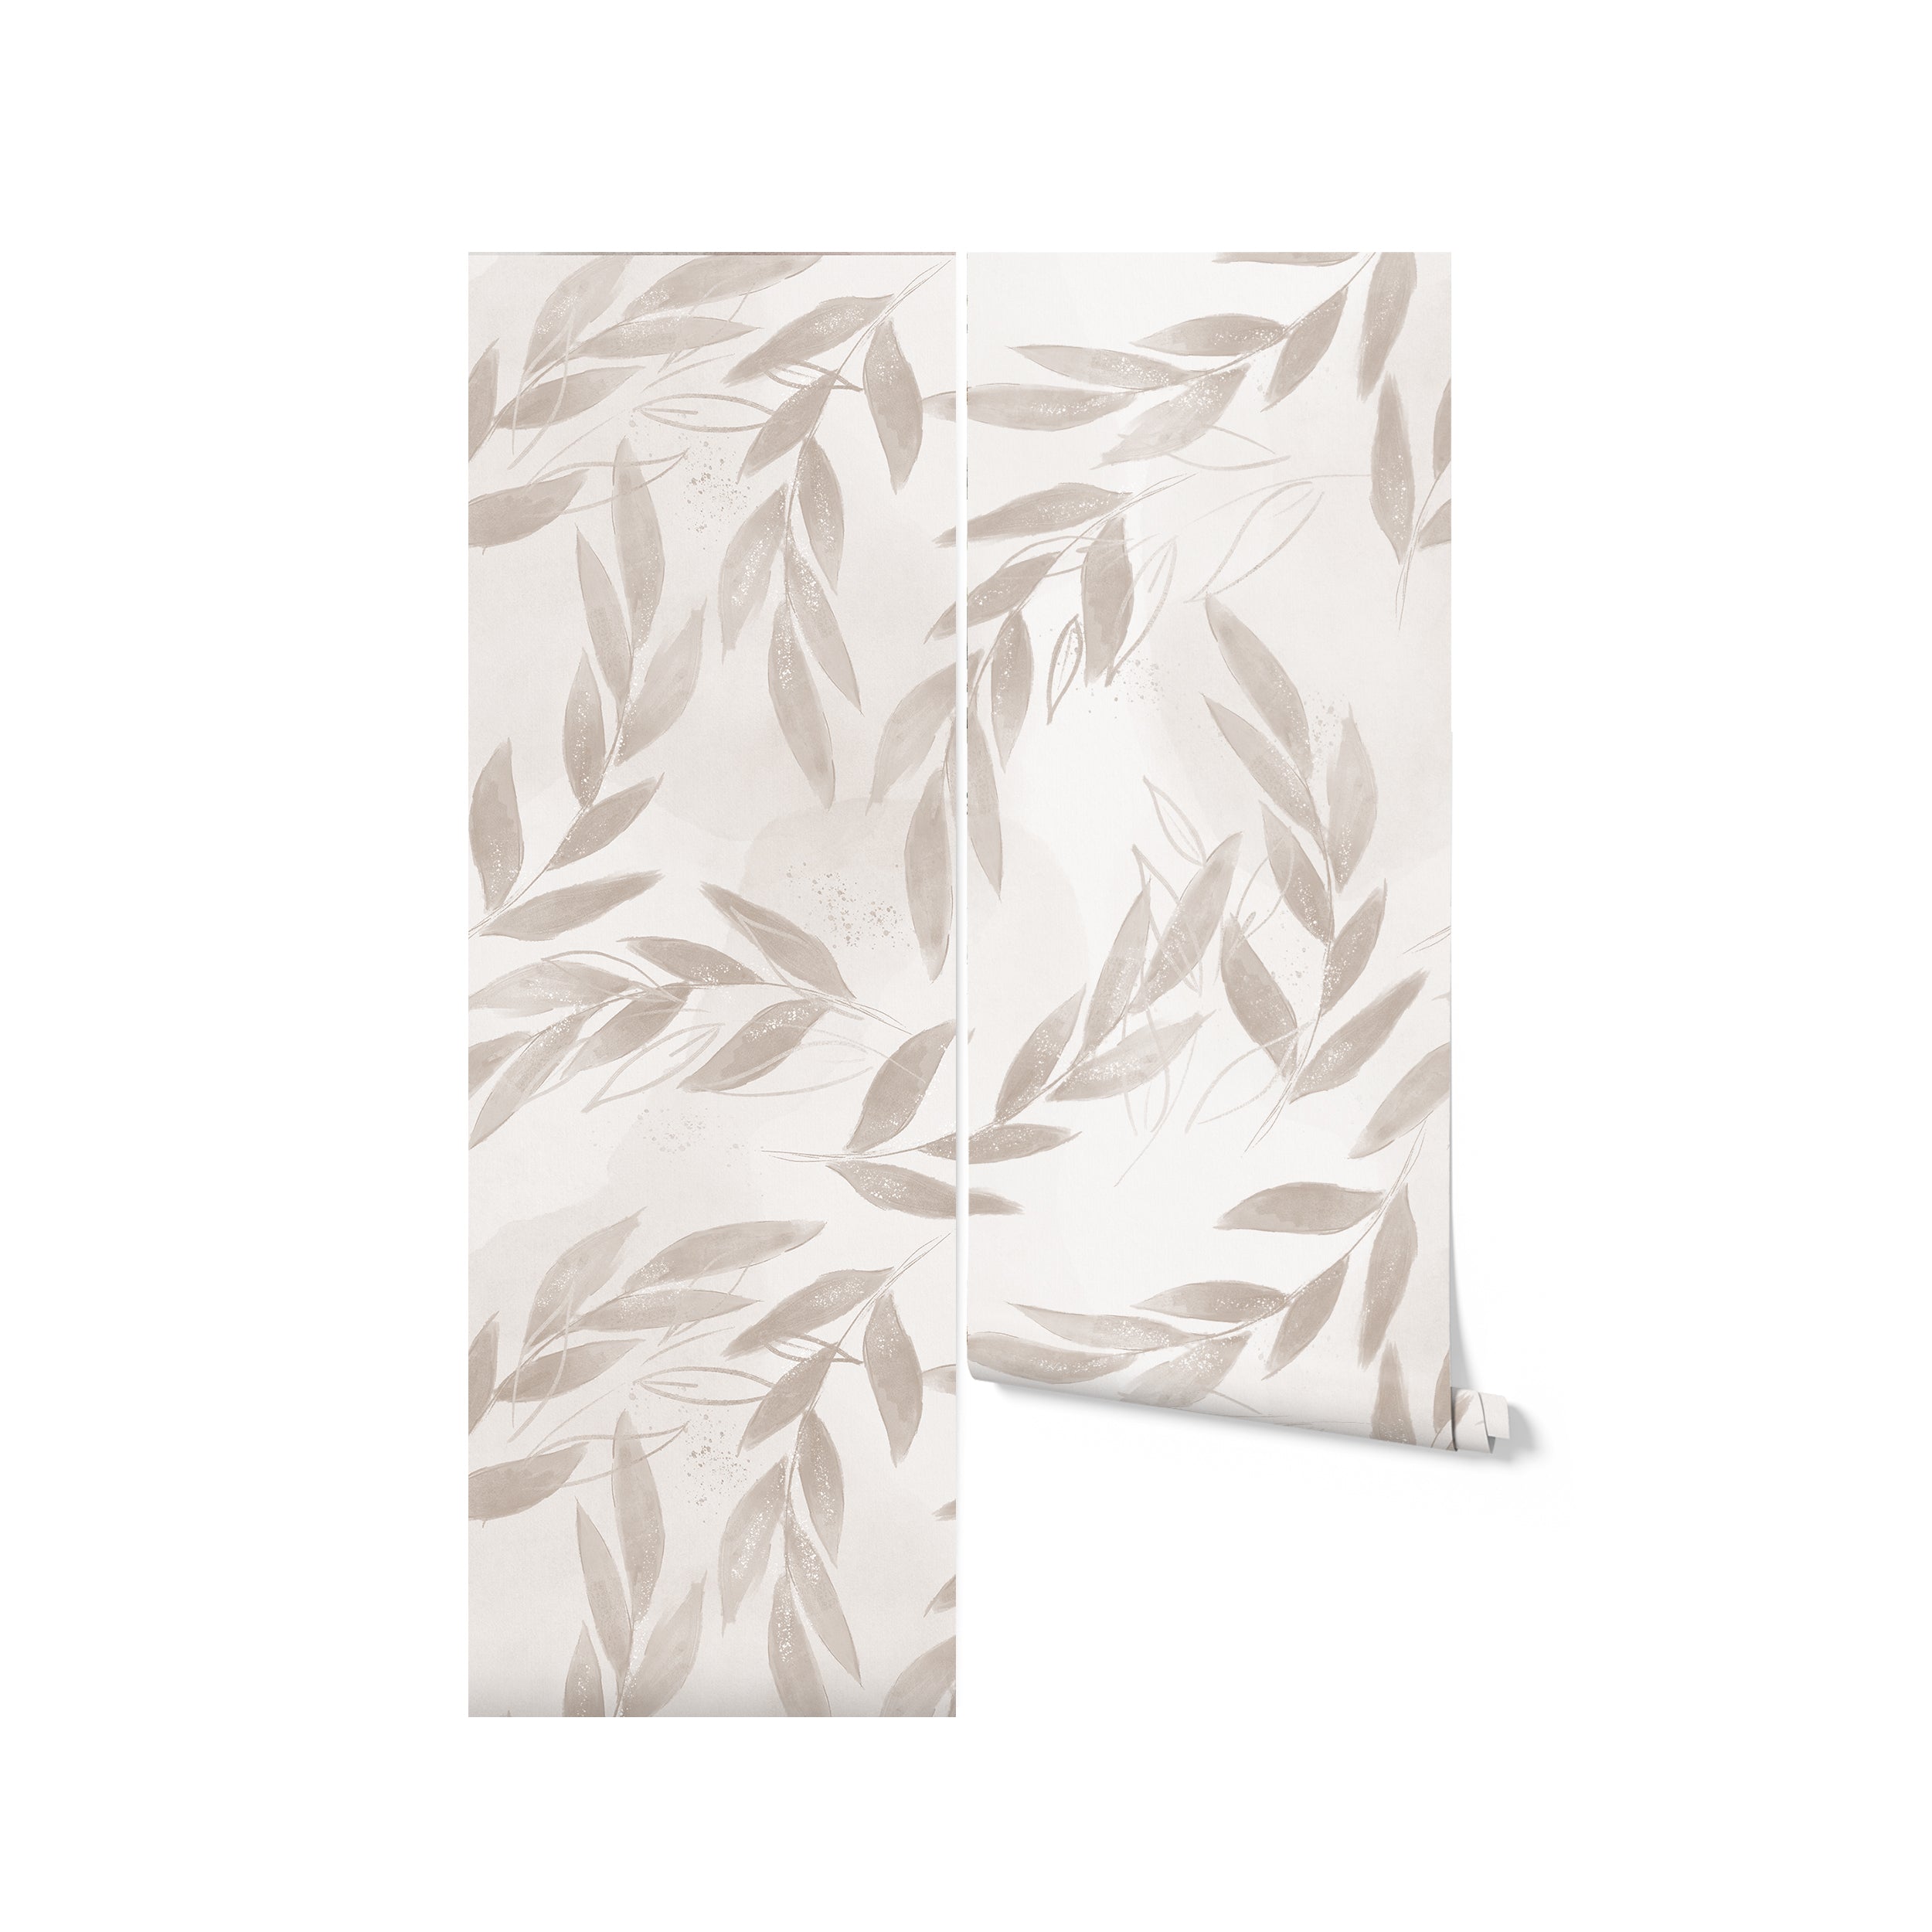 Rolled Shimmering Beige Floral Wallpaper showcasing a pattern of delicate leaves in beige with a soft shimmer finish, ideal for adding a refined and tranquil atmosphere to any room.